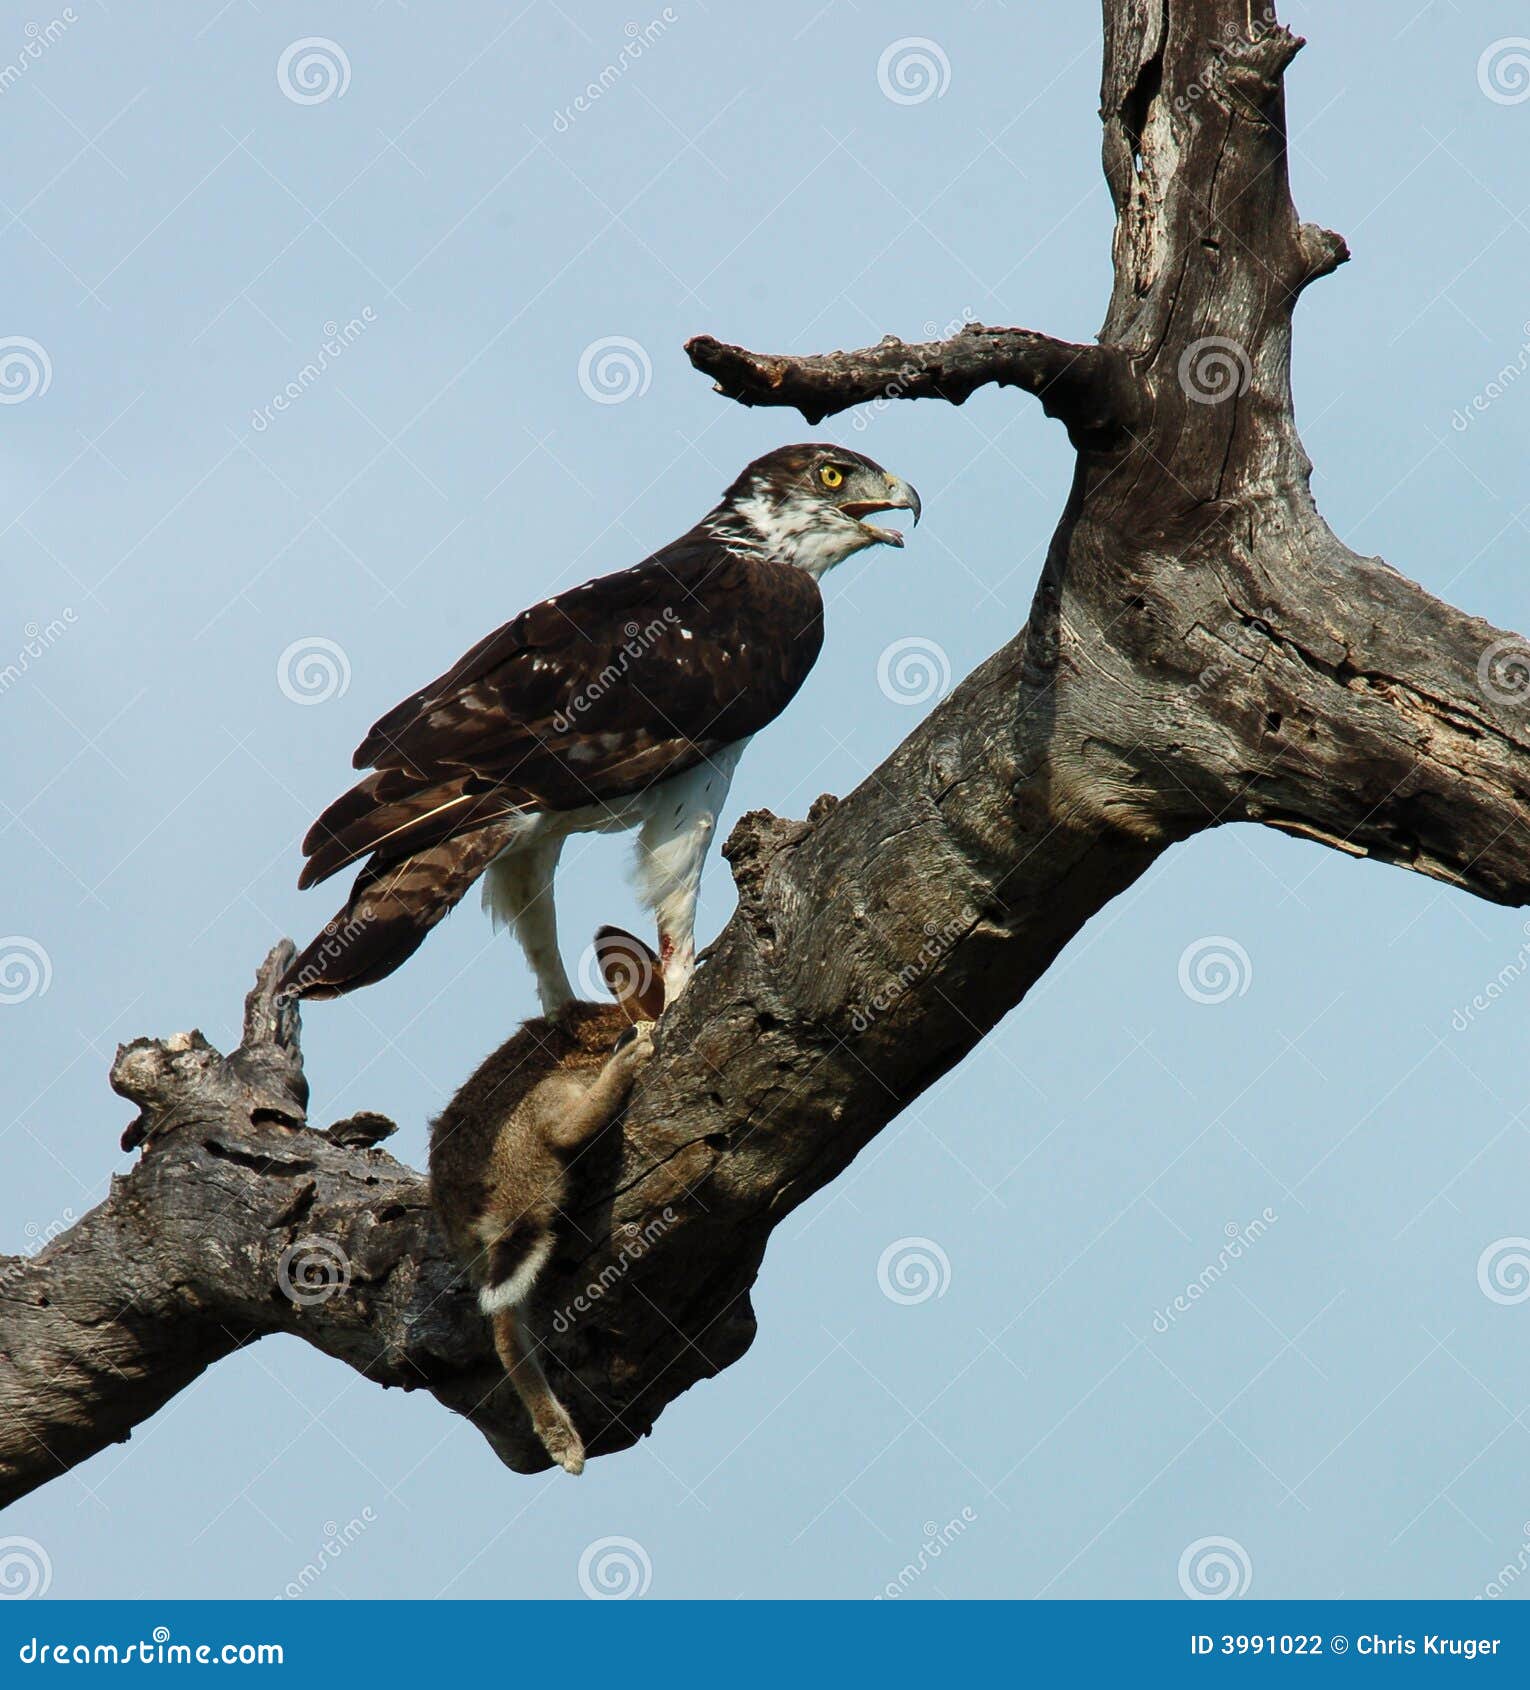 Martial Eagle with its prey, a Cape Hare, in South Africa.